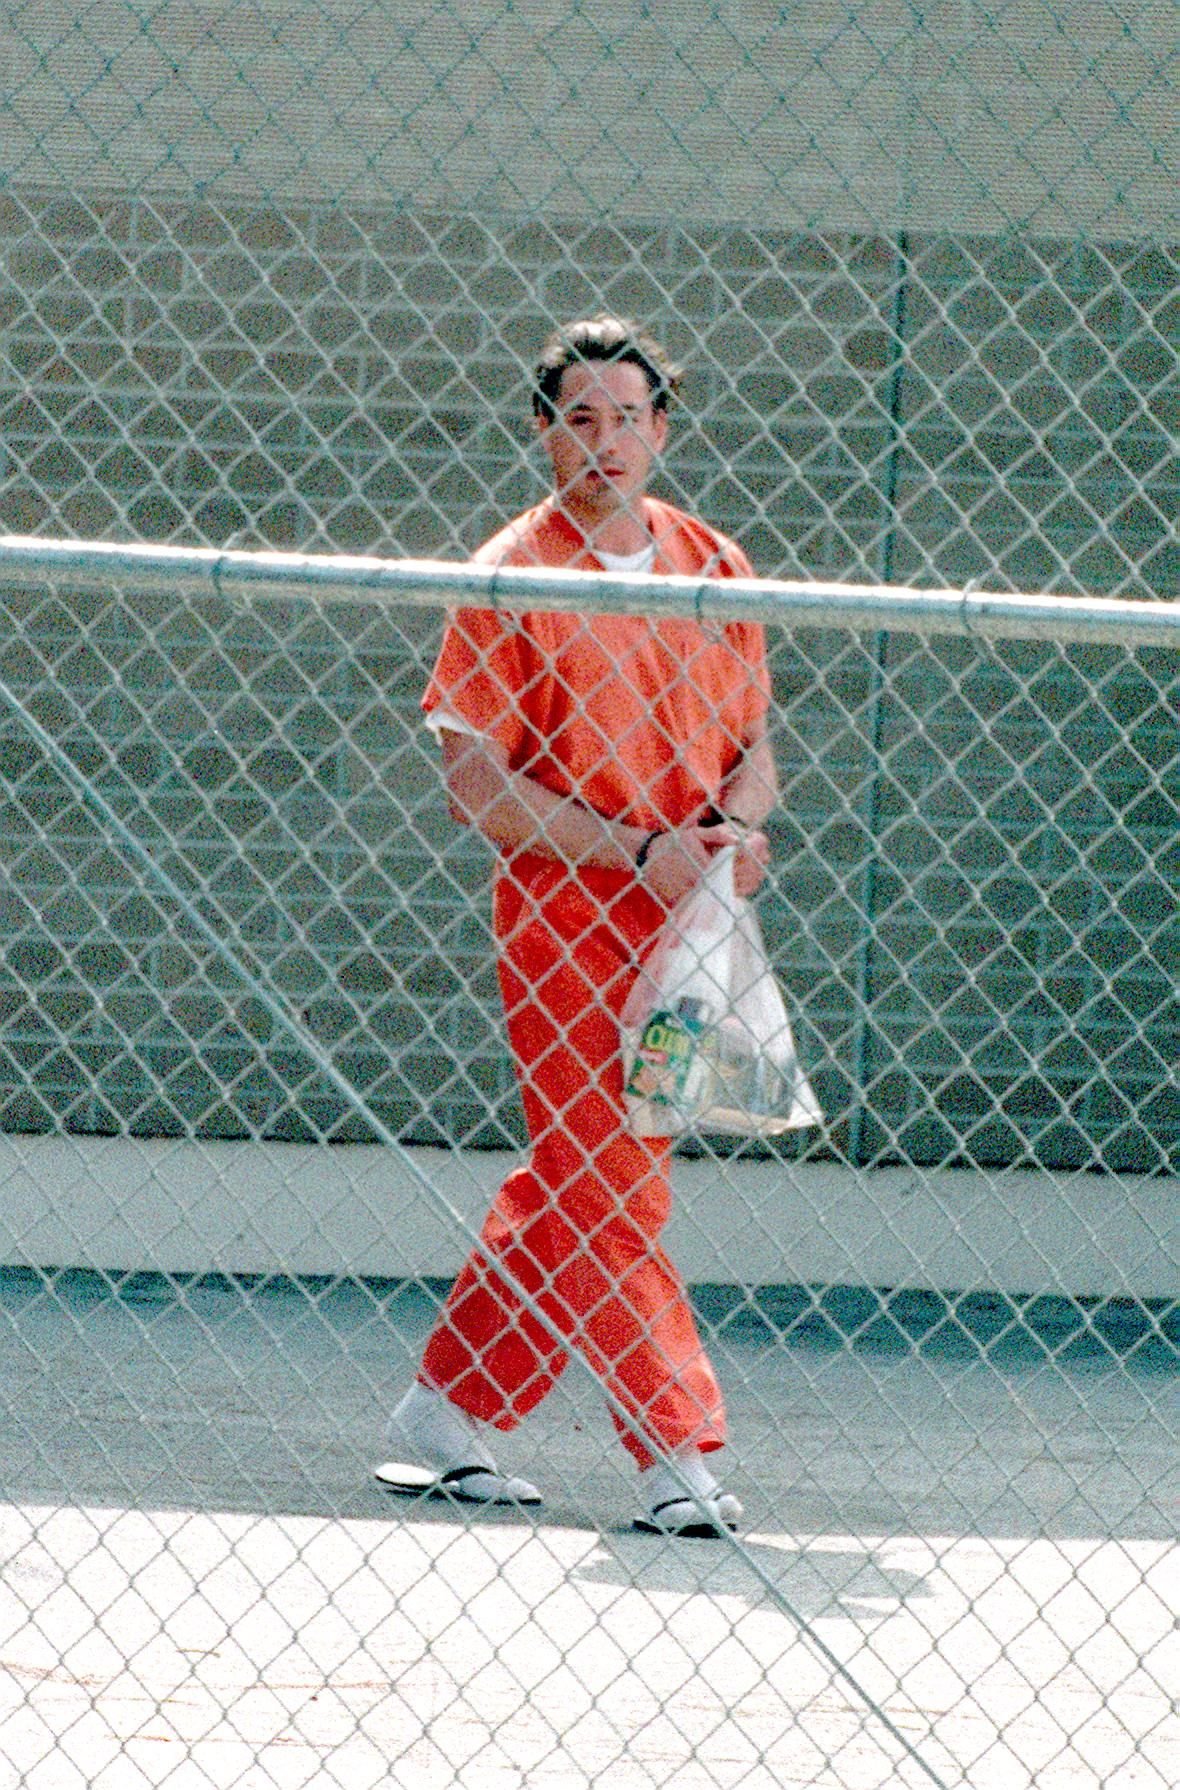 Robert Downey, Jr. after being sentenced to three years in prison in 1999 Malibu, CA | Source: Getty Images